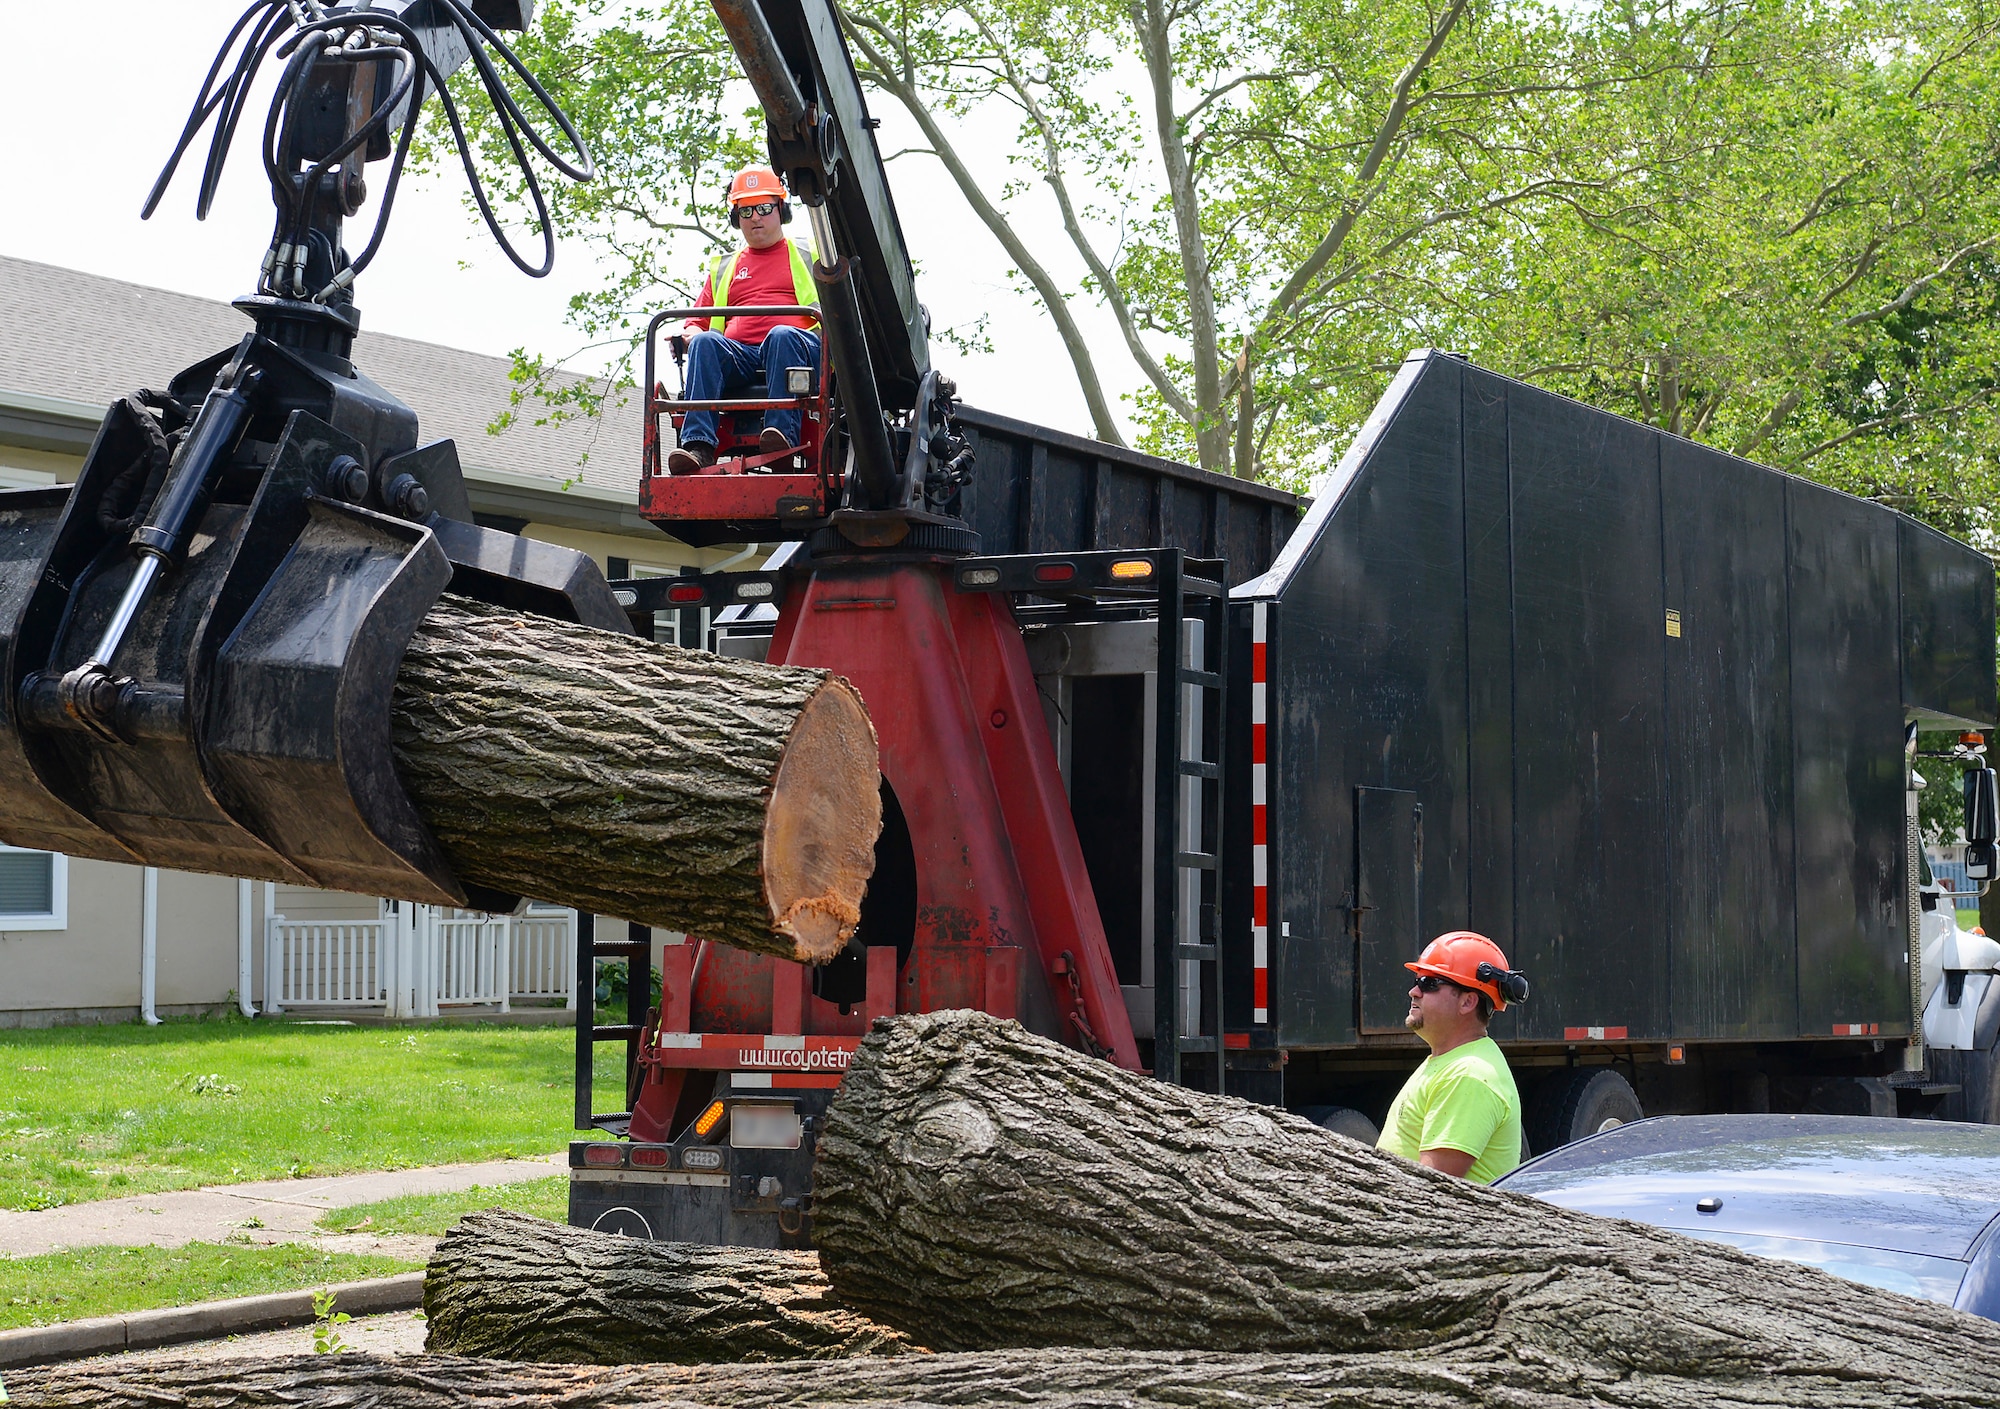 Contractors use heavy equipment to remove larges logs during the recovery operations at Wright-Patterson AFB.  Volunteers from around Wright-Patterson AFB worked alongside base emergency responders and housing residents to ensure everyone’s safety and begin the cleanup process.  (U.S. Air Force photo by R.J. Oriez)